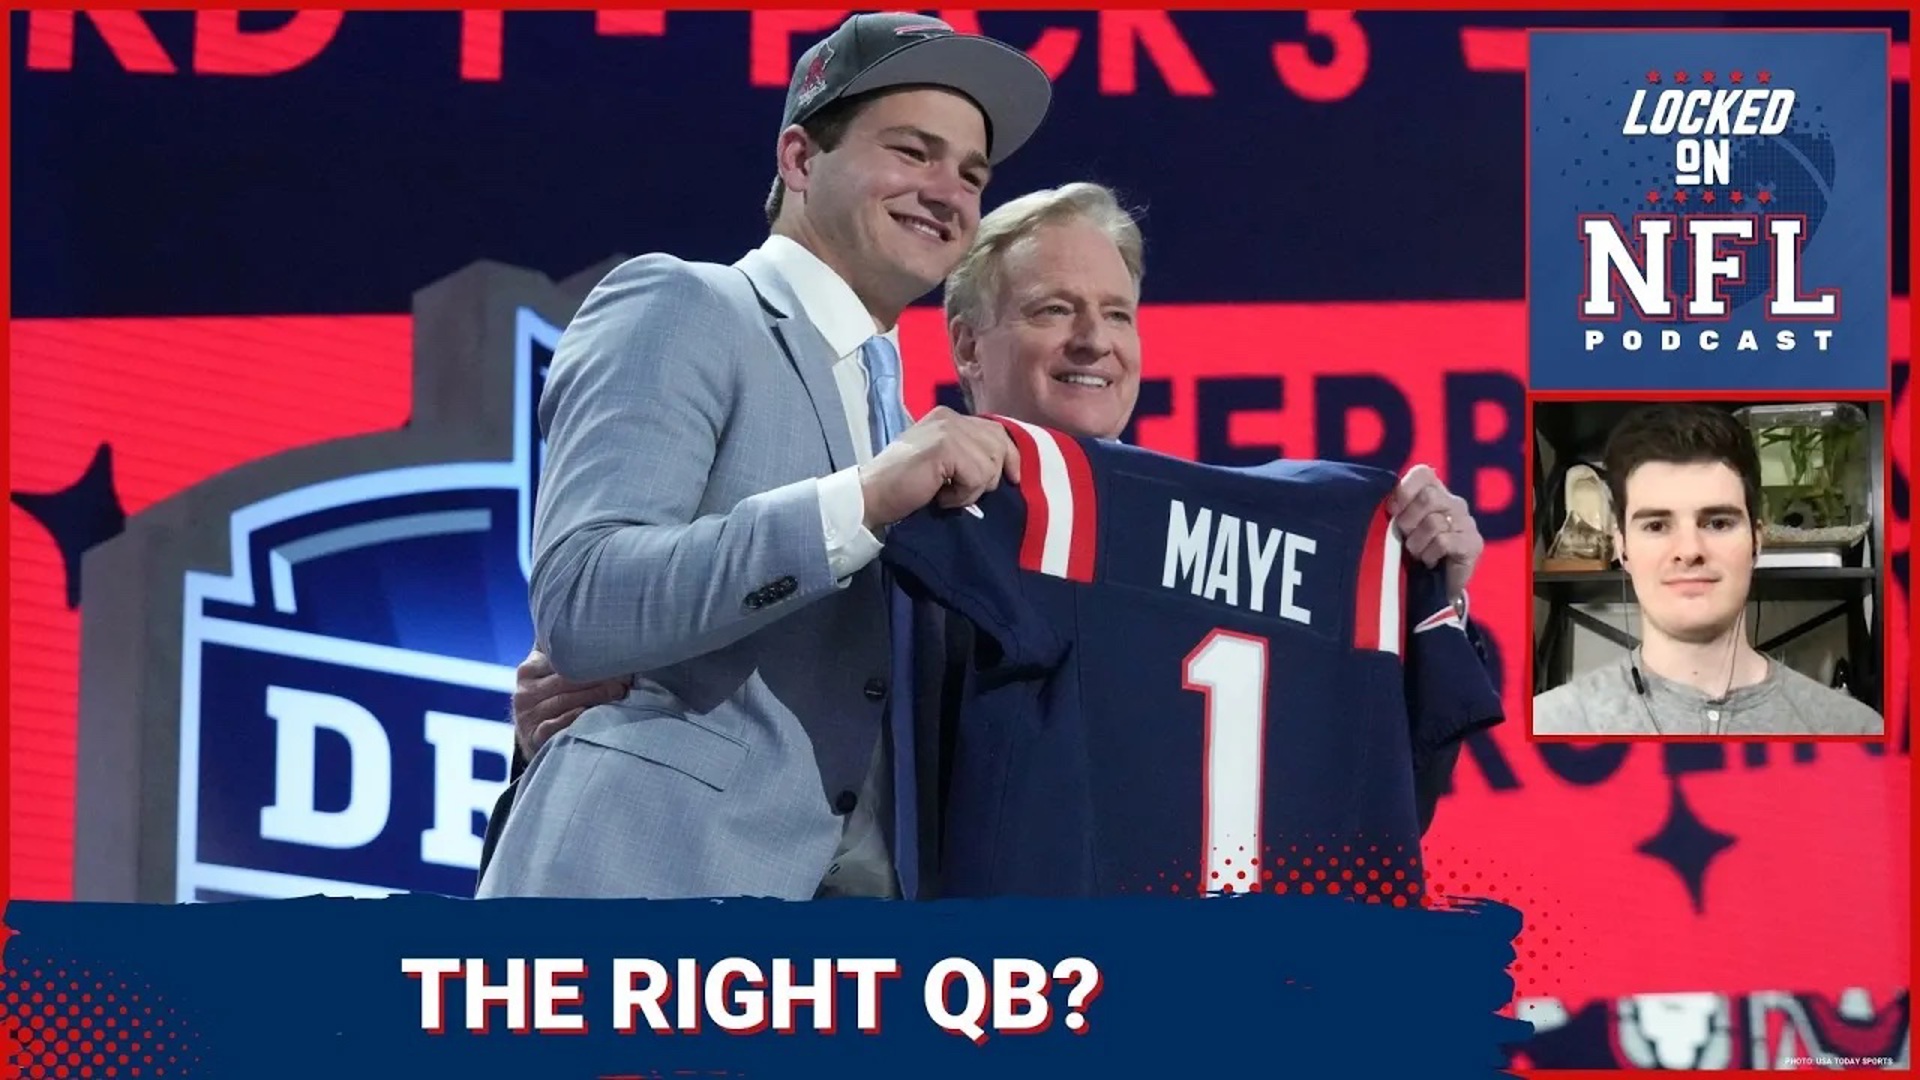 We look at why Drake Maye is the right quarterback to lead the New England Patriots back to the promised land and more.